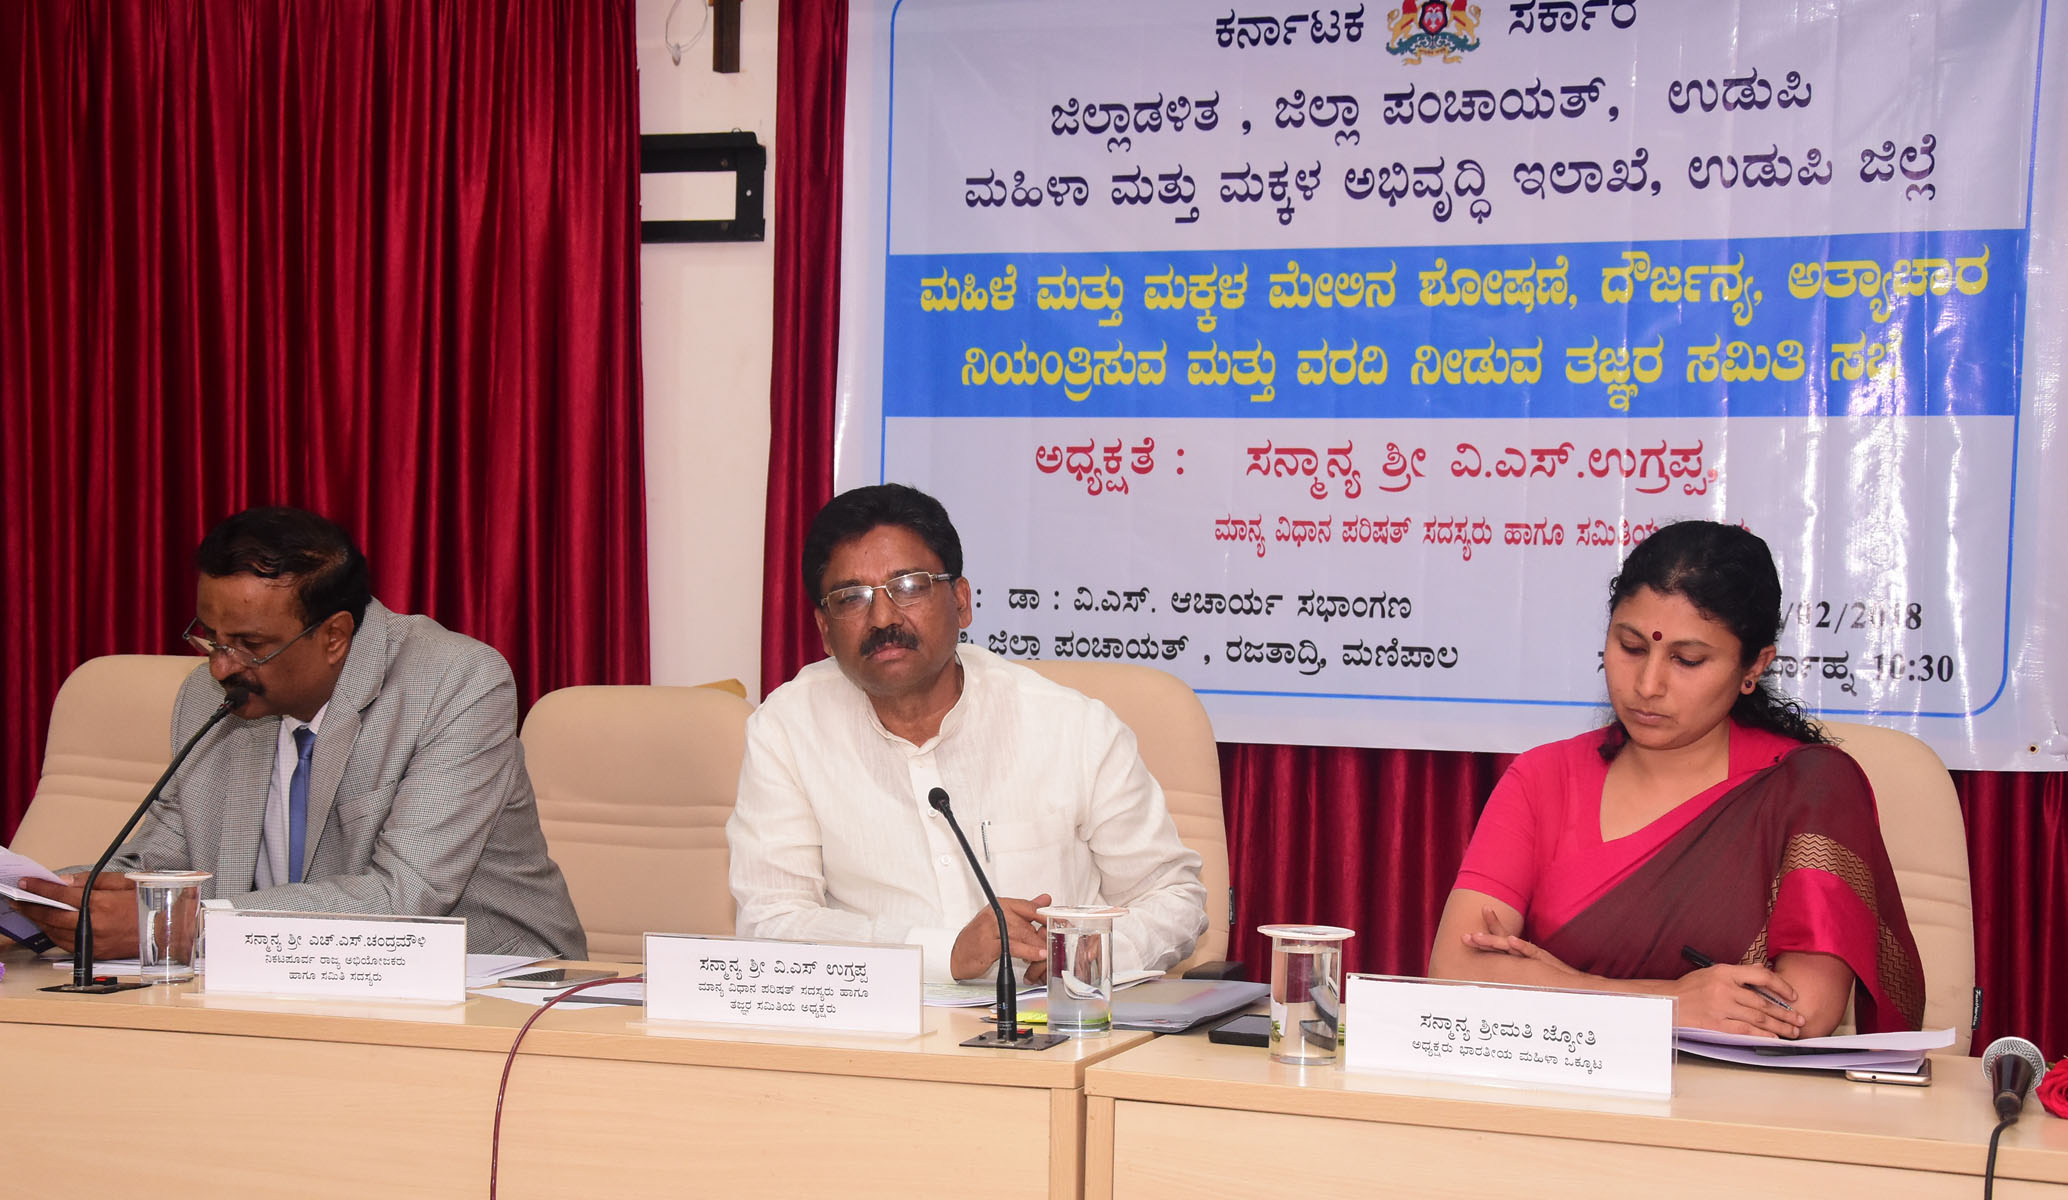 The atrocities on Women & Children cases even though occurs in the district, the conviction rate very low - V. S. Ugrappa